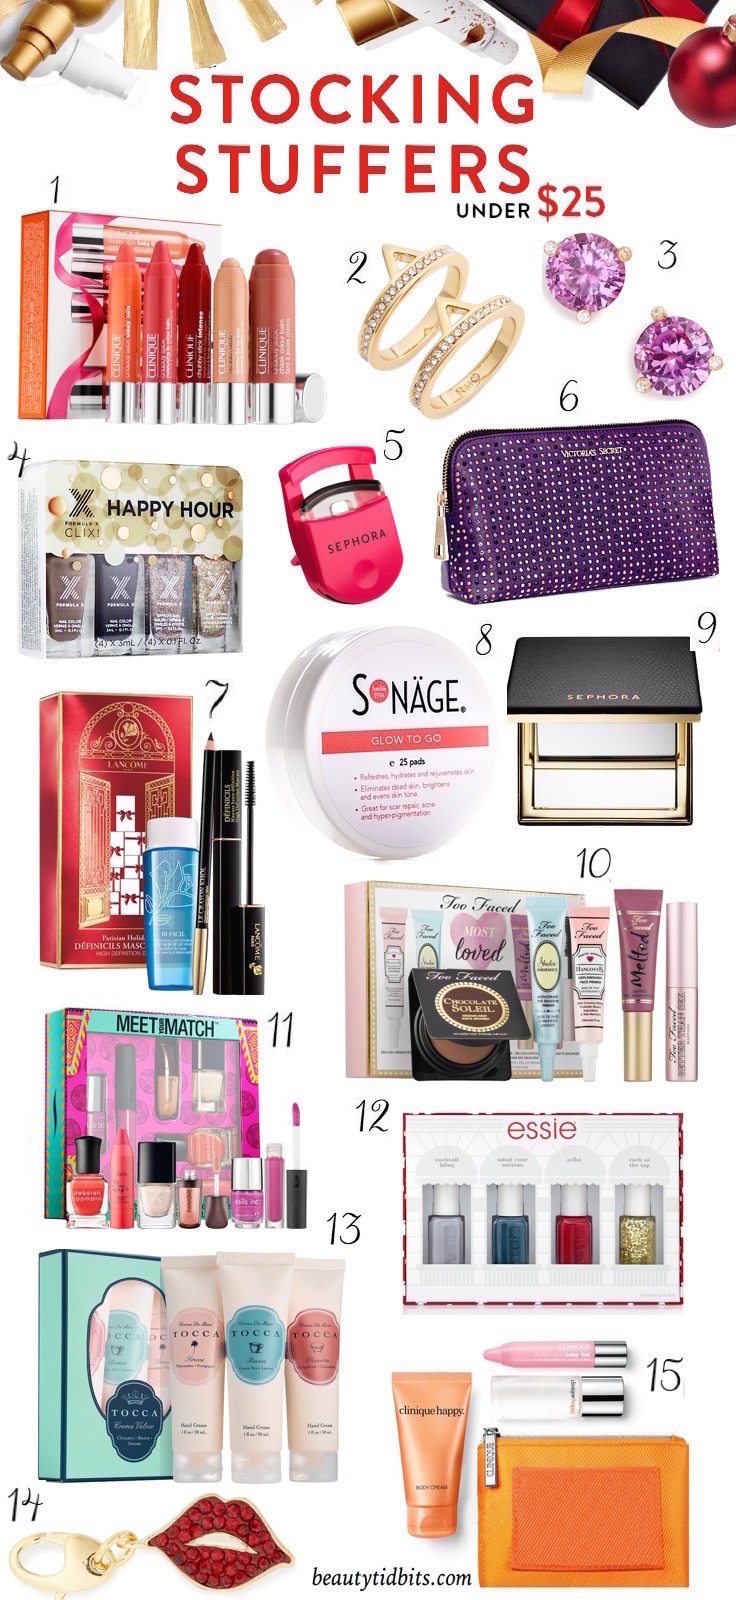 Need some ideas to stuff those stockings? Here are 25 chic beauty & style picks under $25 that are sure to please!